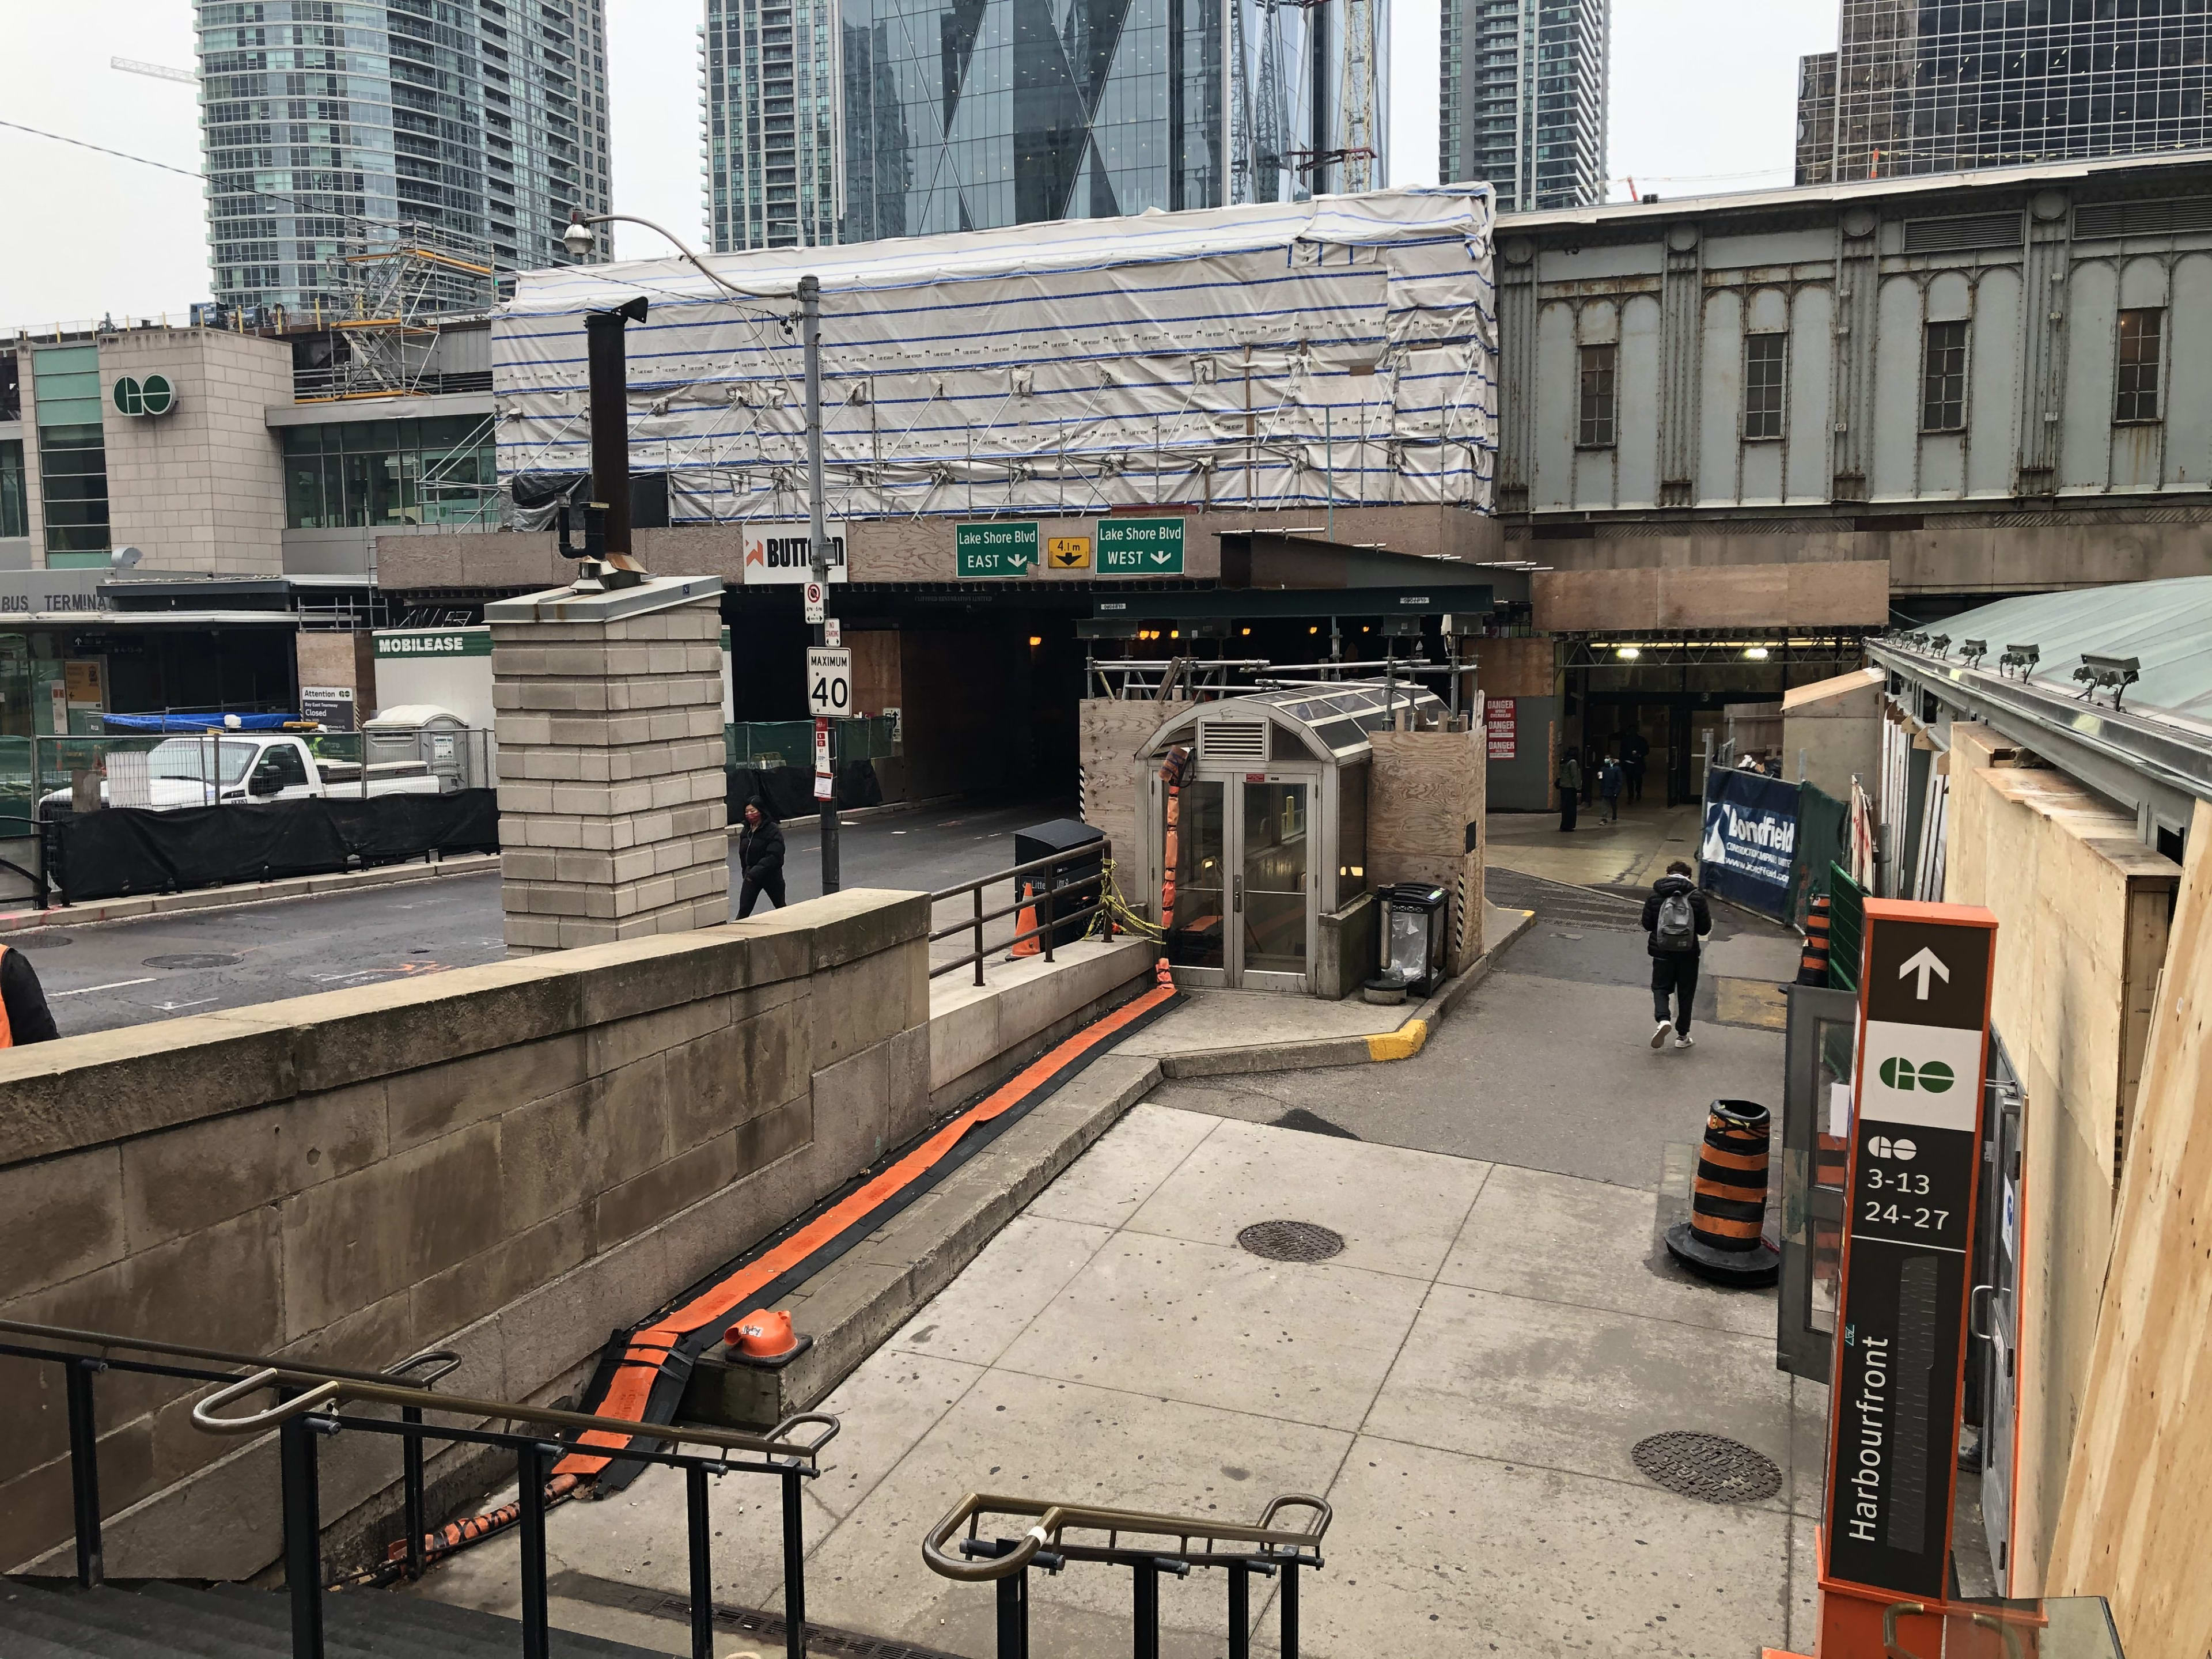 The view from the west side of Union Station on Bay Street looking south.